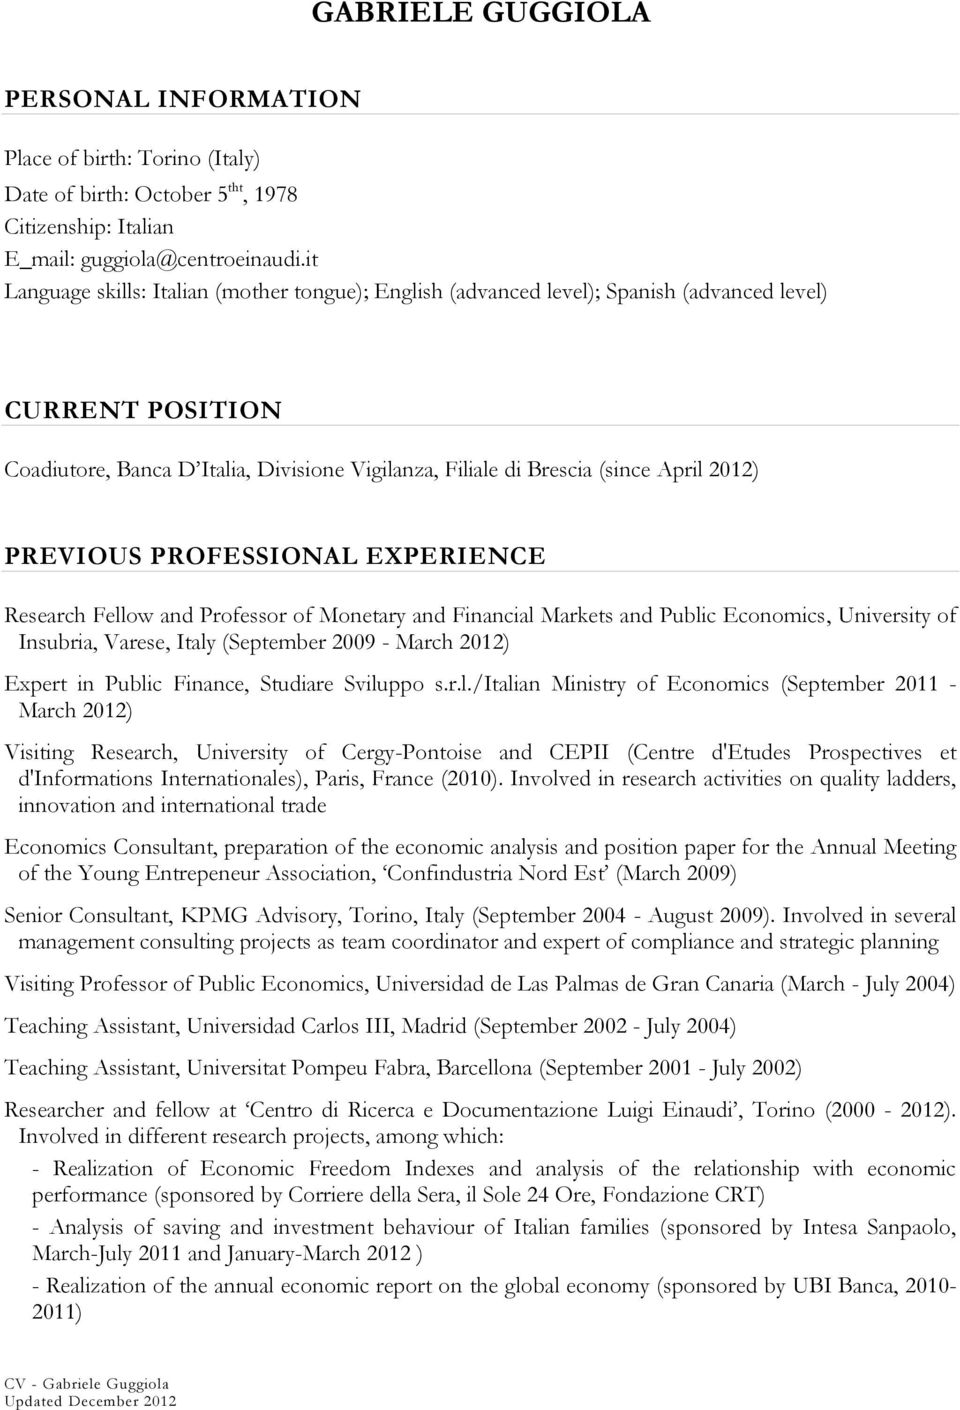 PREVIOUS PROFESSIONAL EXPERIENCE Research Fellow and Professor of Monetary and Financial Markets and Public Economics, University of Insubria, Varese, Italy (September 2009 - March 2012) Expert in